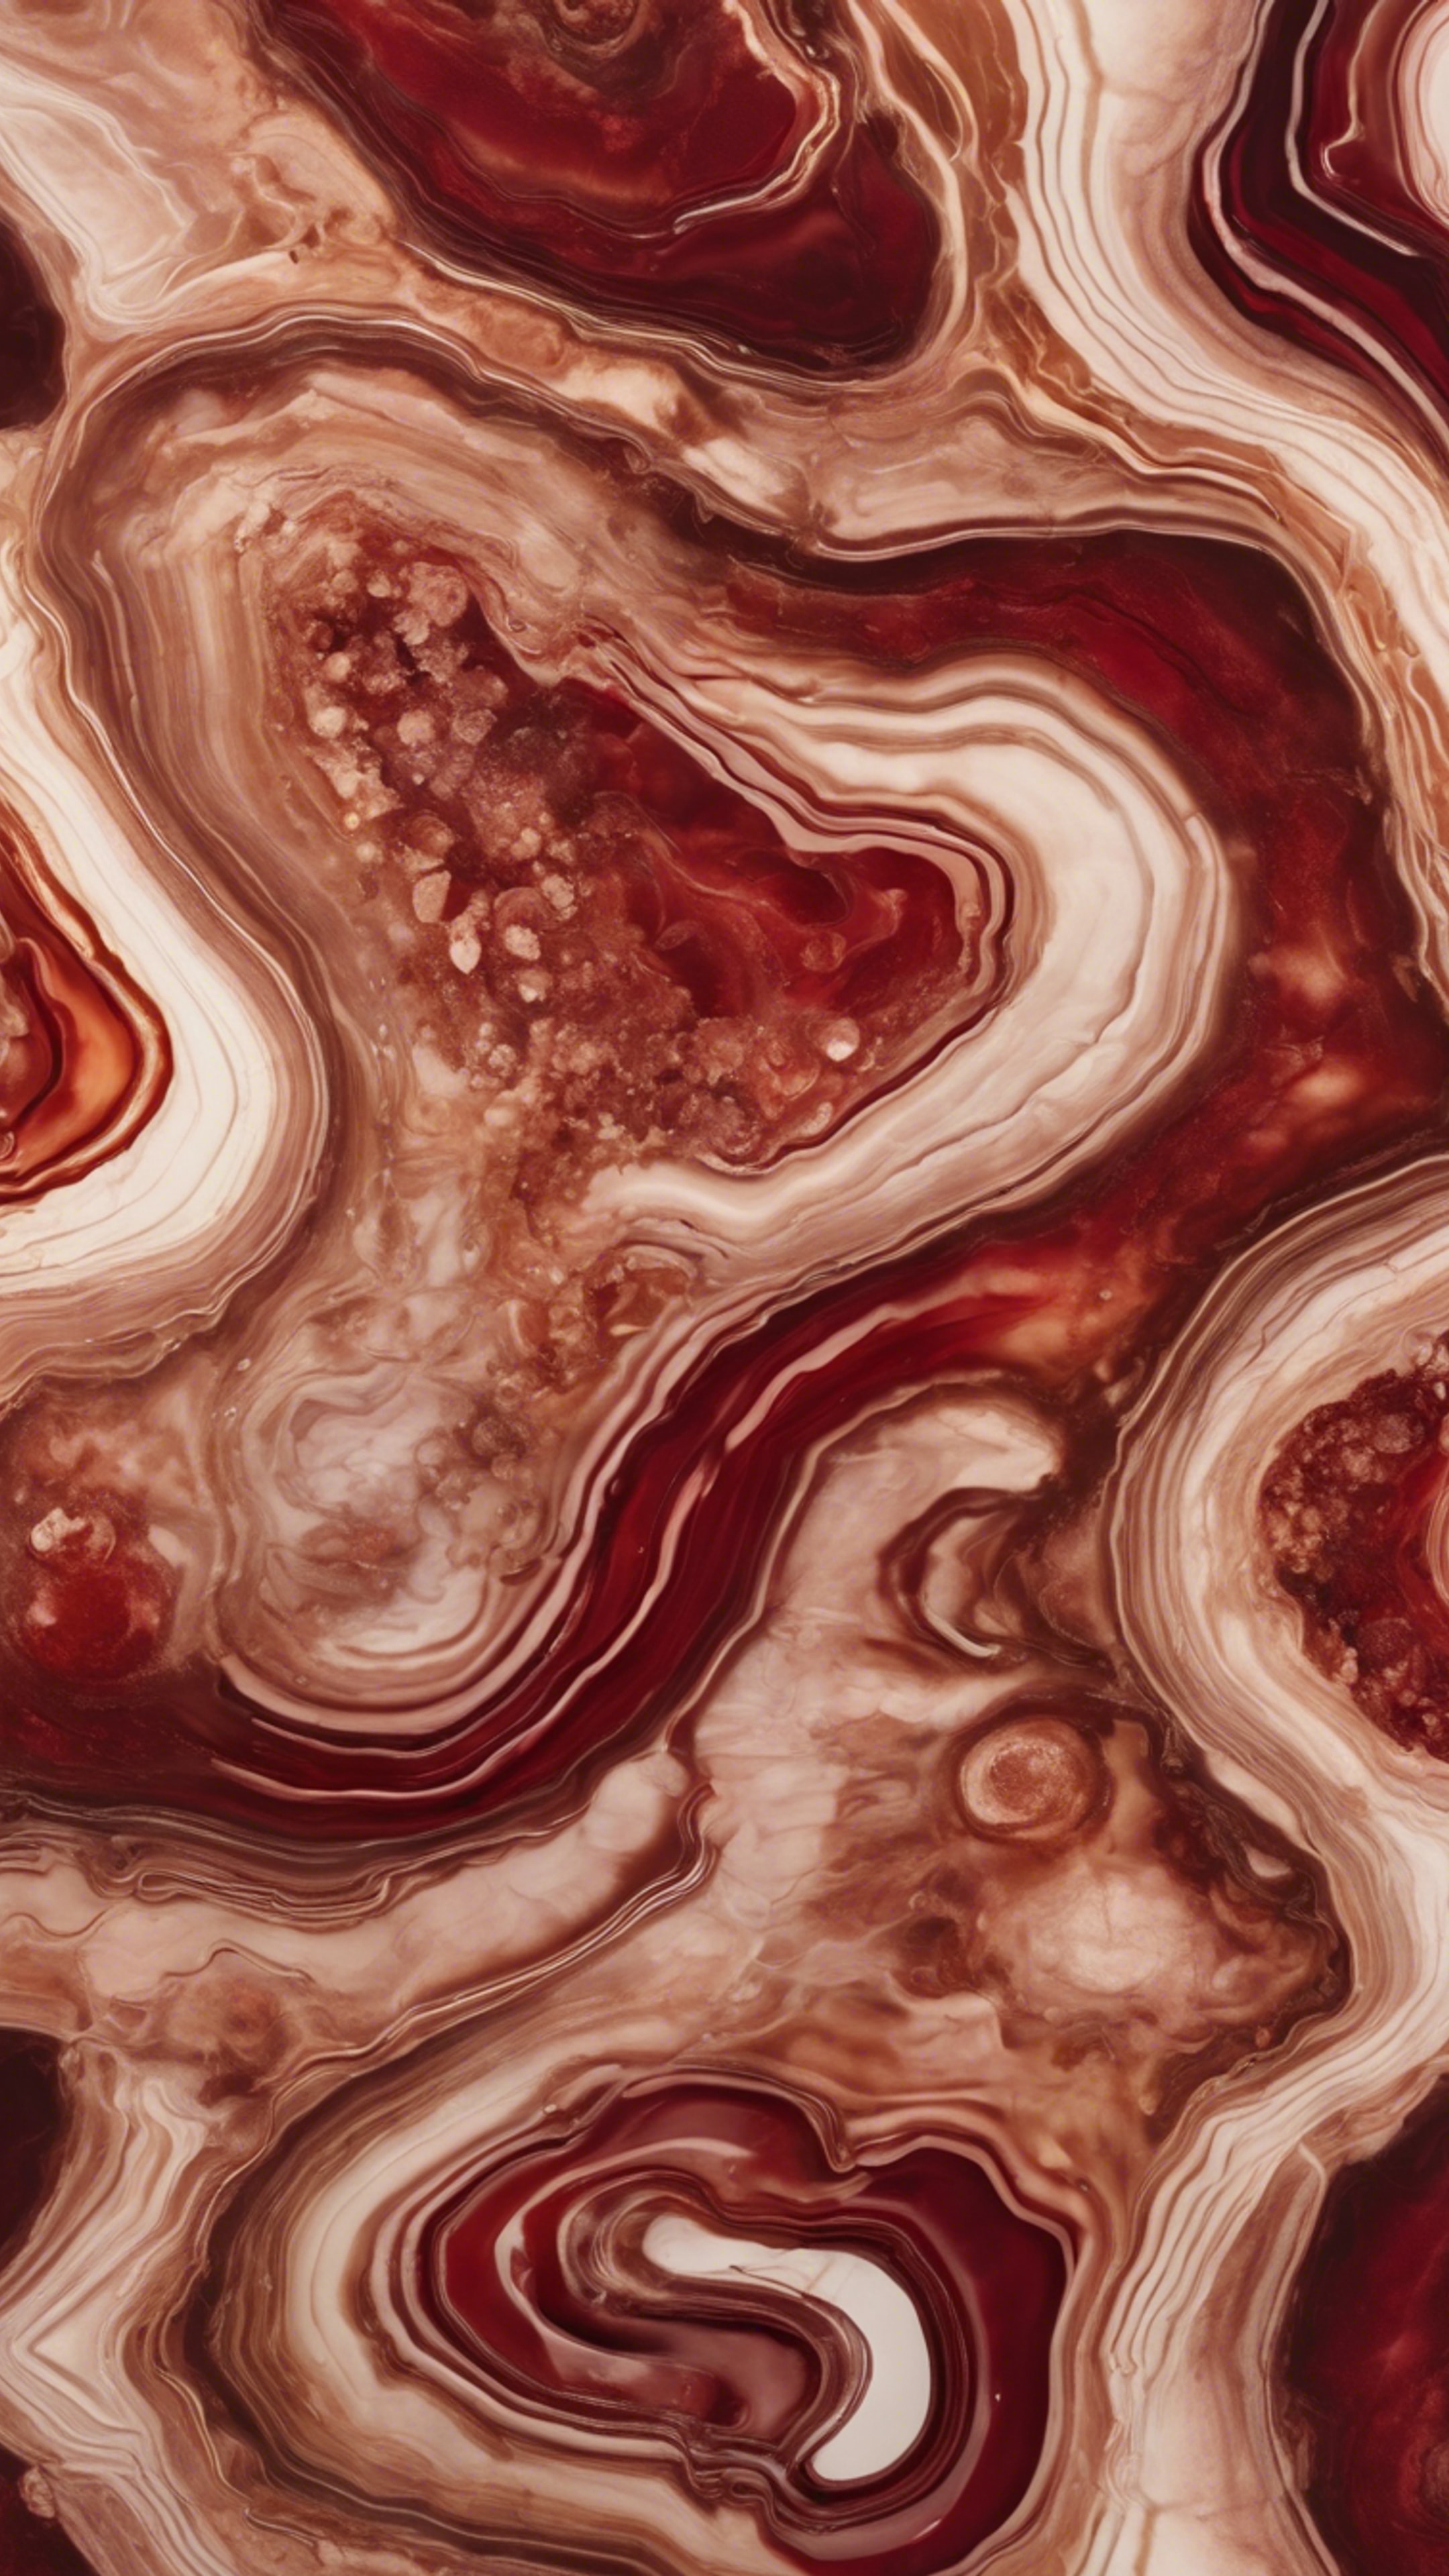 Grungy agate swirls in garnet red and sepia tones, forming a fascinating, abstract pattern. Ταπετσαρία[bb48f1c473e4473bbd4a]